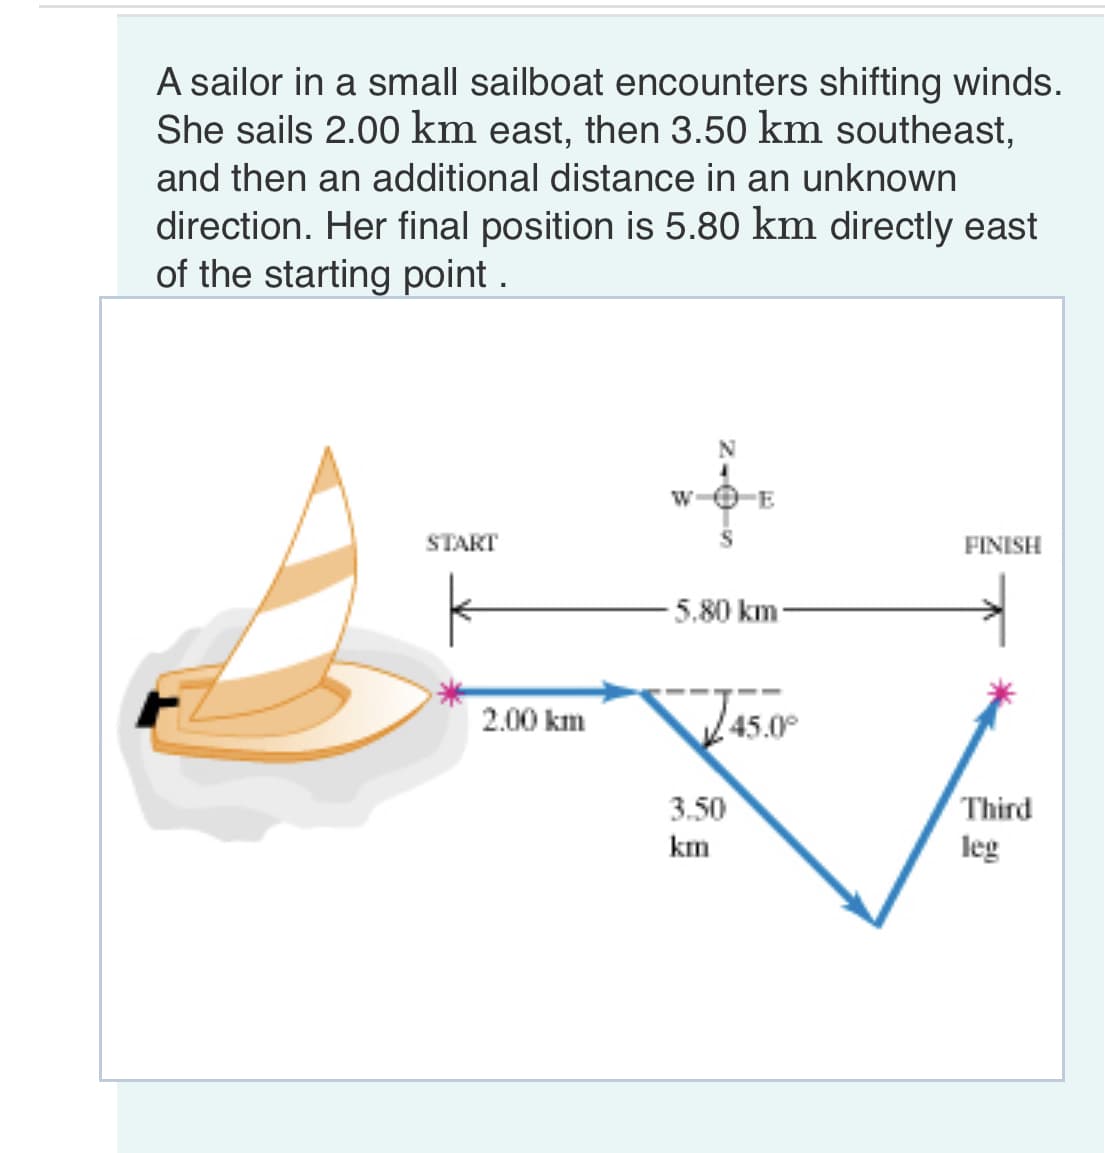 A sailor in a small sailboat encounters shifting winds.
She sails 2.00 km east, then 3.50 km southeast,
and then an additional distance in an unknown
direction. Her final position is 5.80 km directly east
of the starting point.
START
2.00 km
W
-5.80 km
45.0°
3.50
km
FINISH
Third
leg